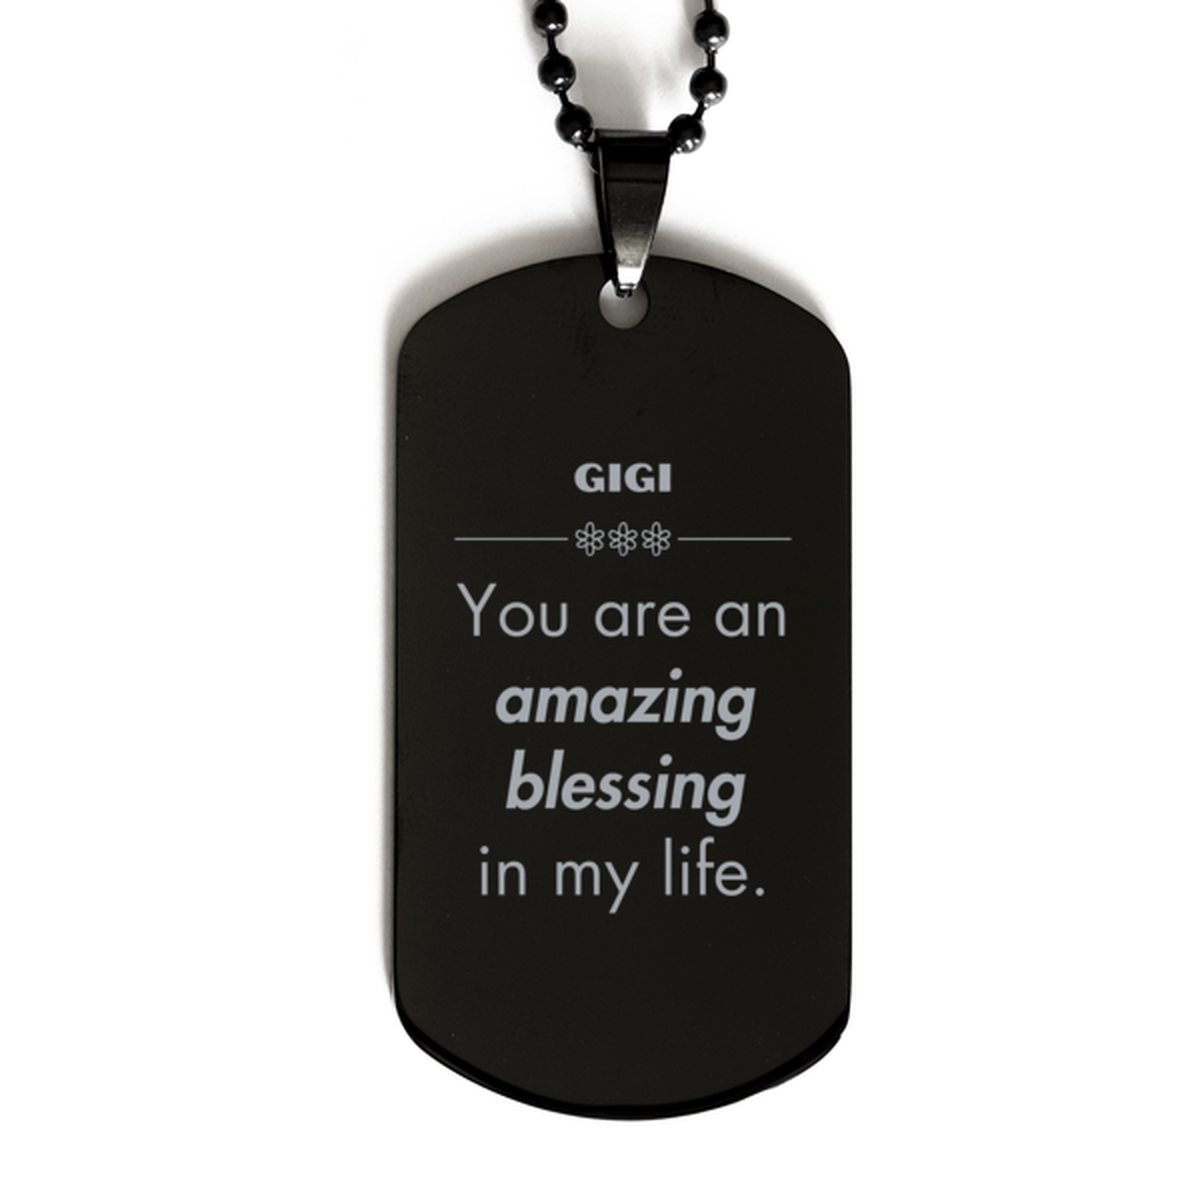 Gigi Black Dog Tag, You are an amazing blessing in my life, Thank You Gifts For Gigi, Inspirational Birthday Christmas Unique Gifts For Gigi